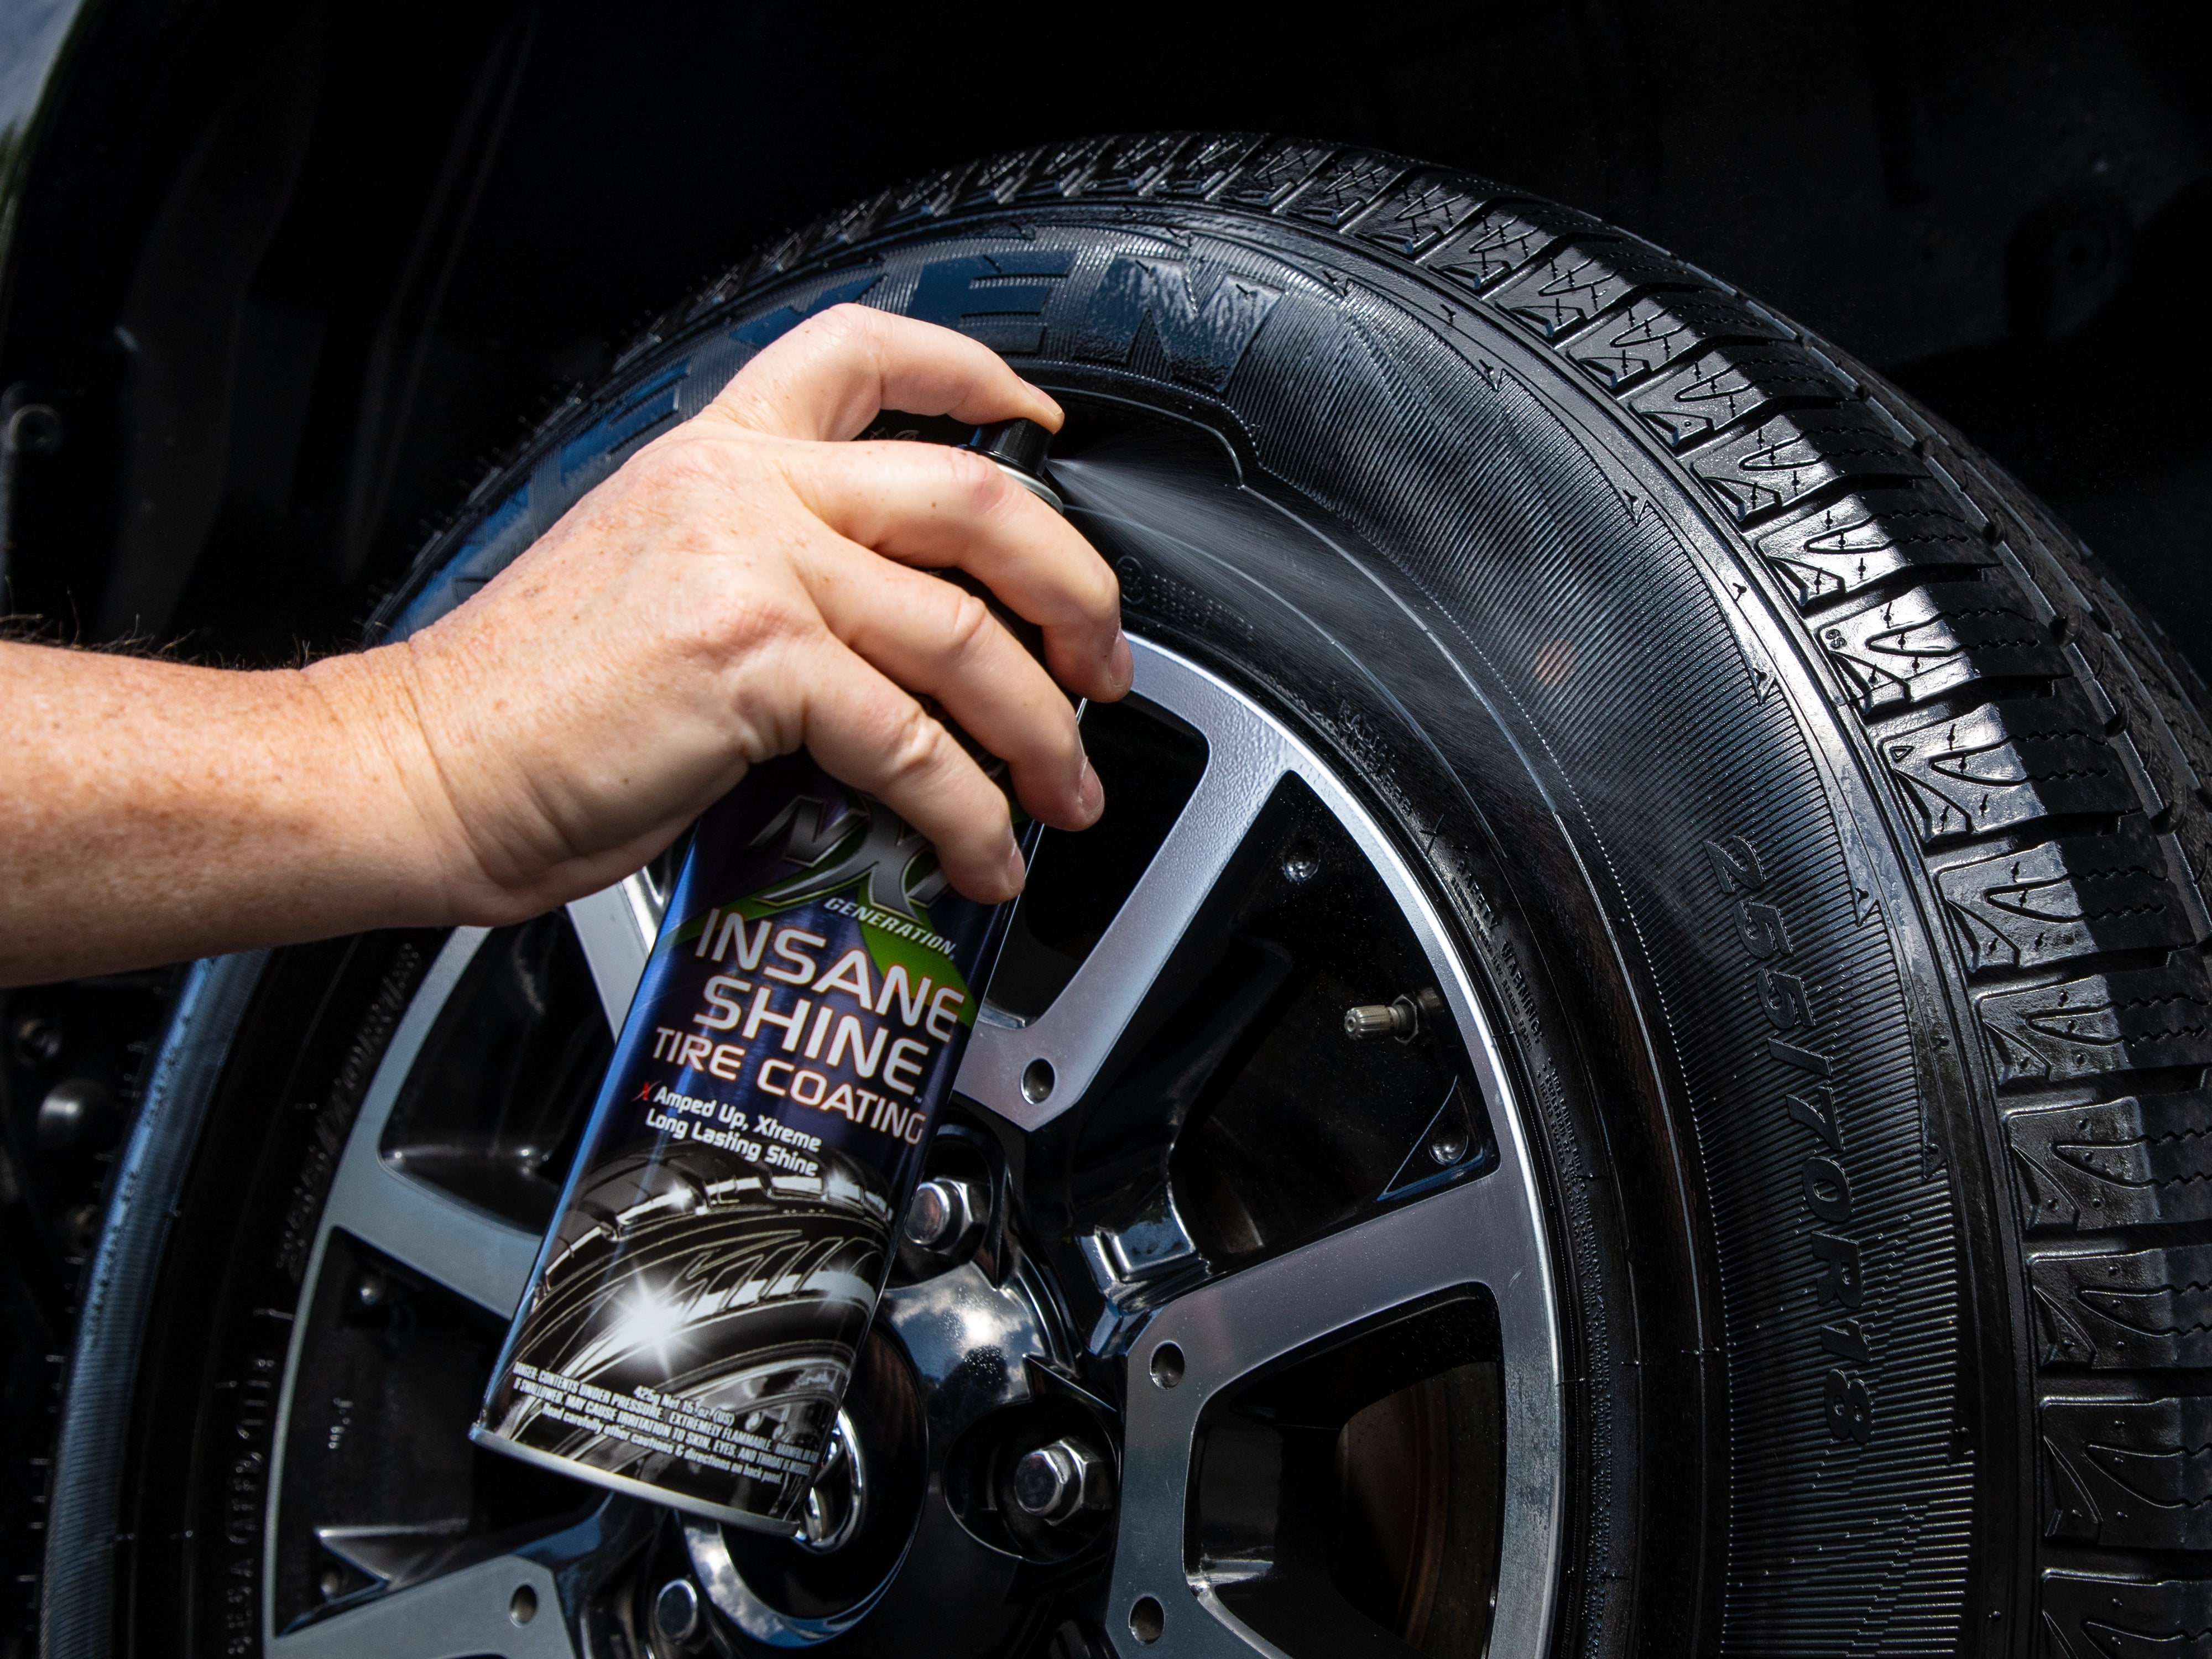 How to Get the Best Tire Shine